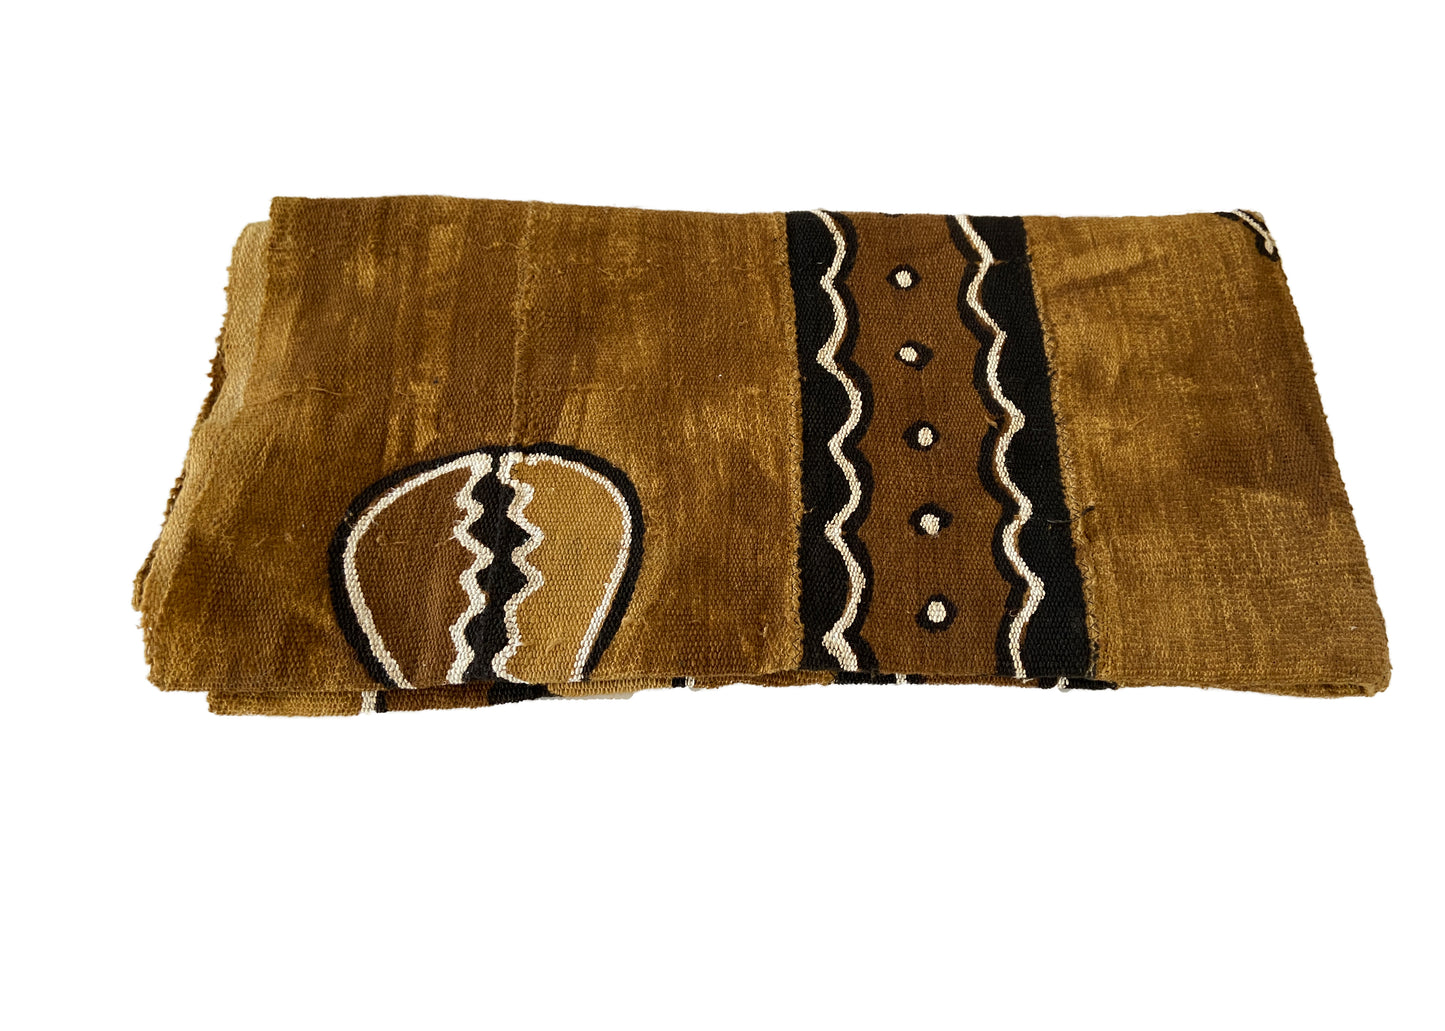 African Bogolan Mud Cloth Textile 63 " by 40" # 1772